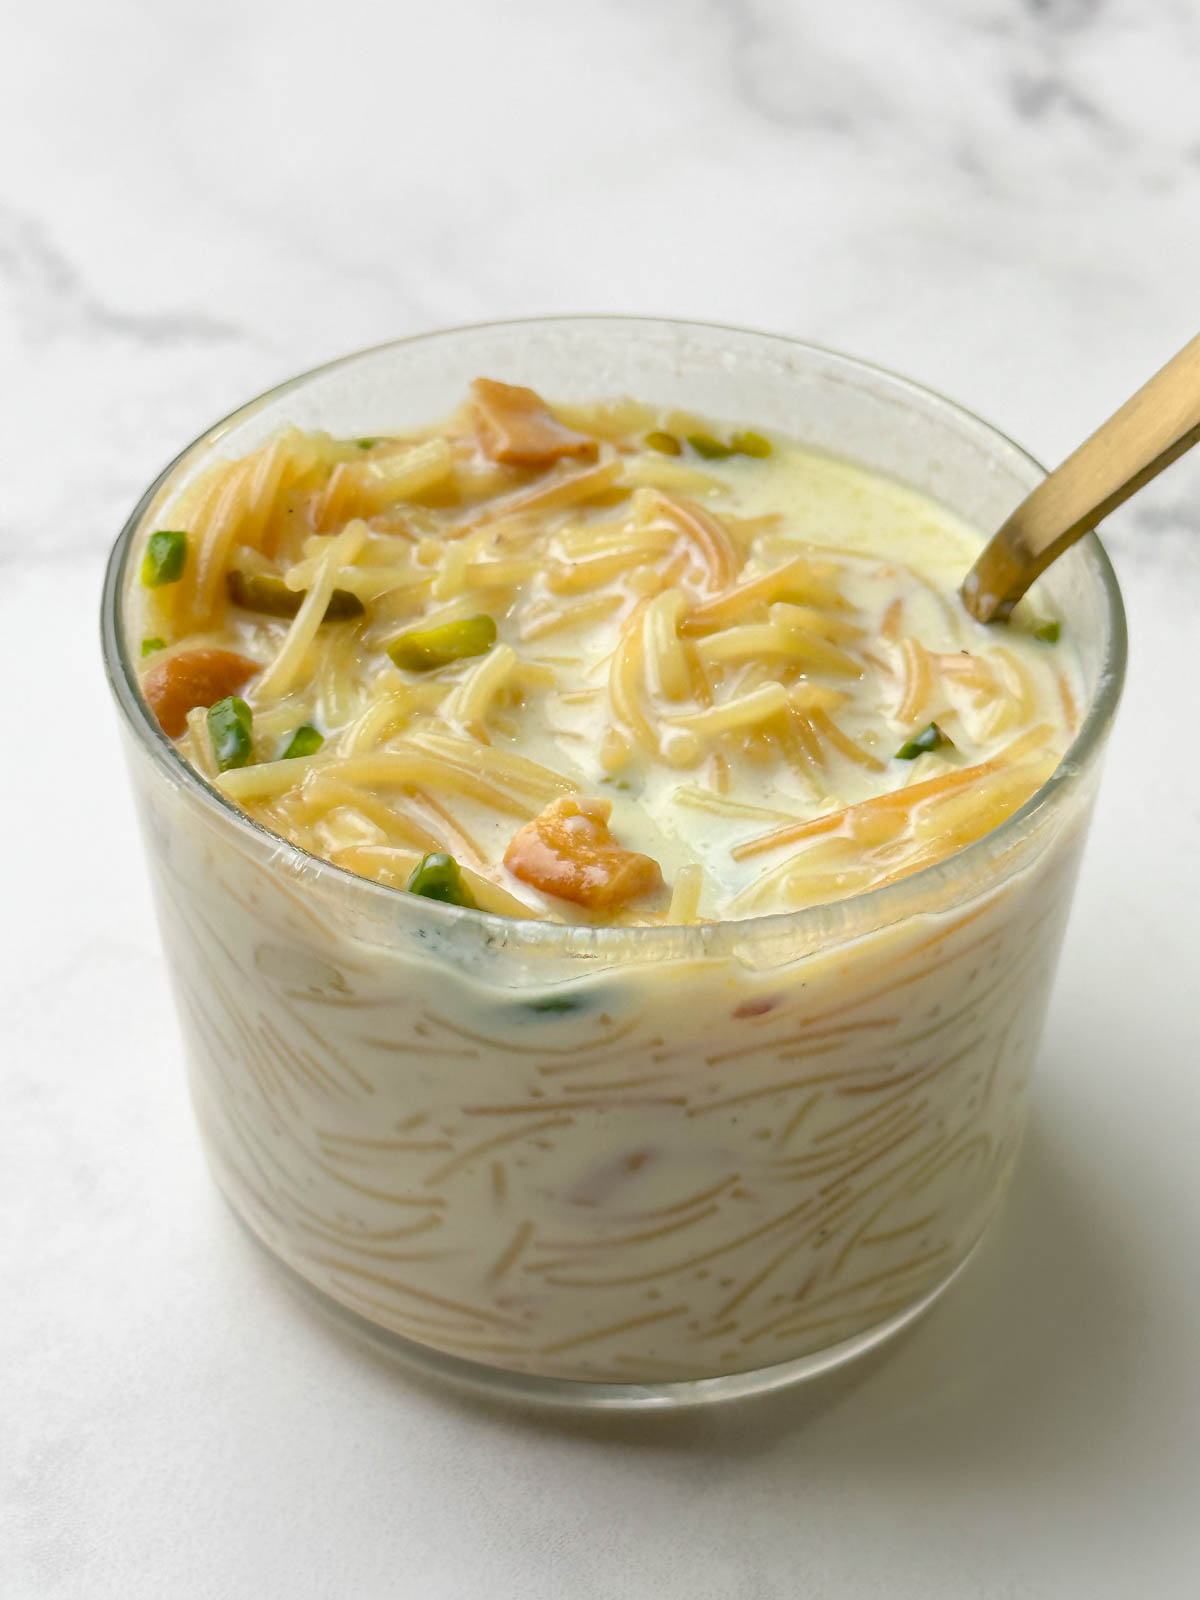 semiya payasam/kheer served in a glass bowl with a spoon